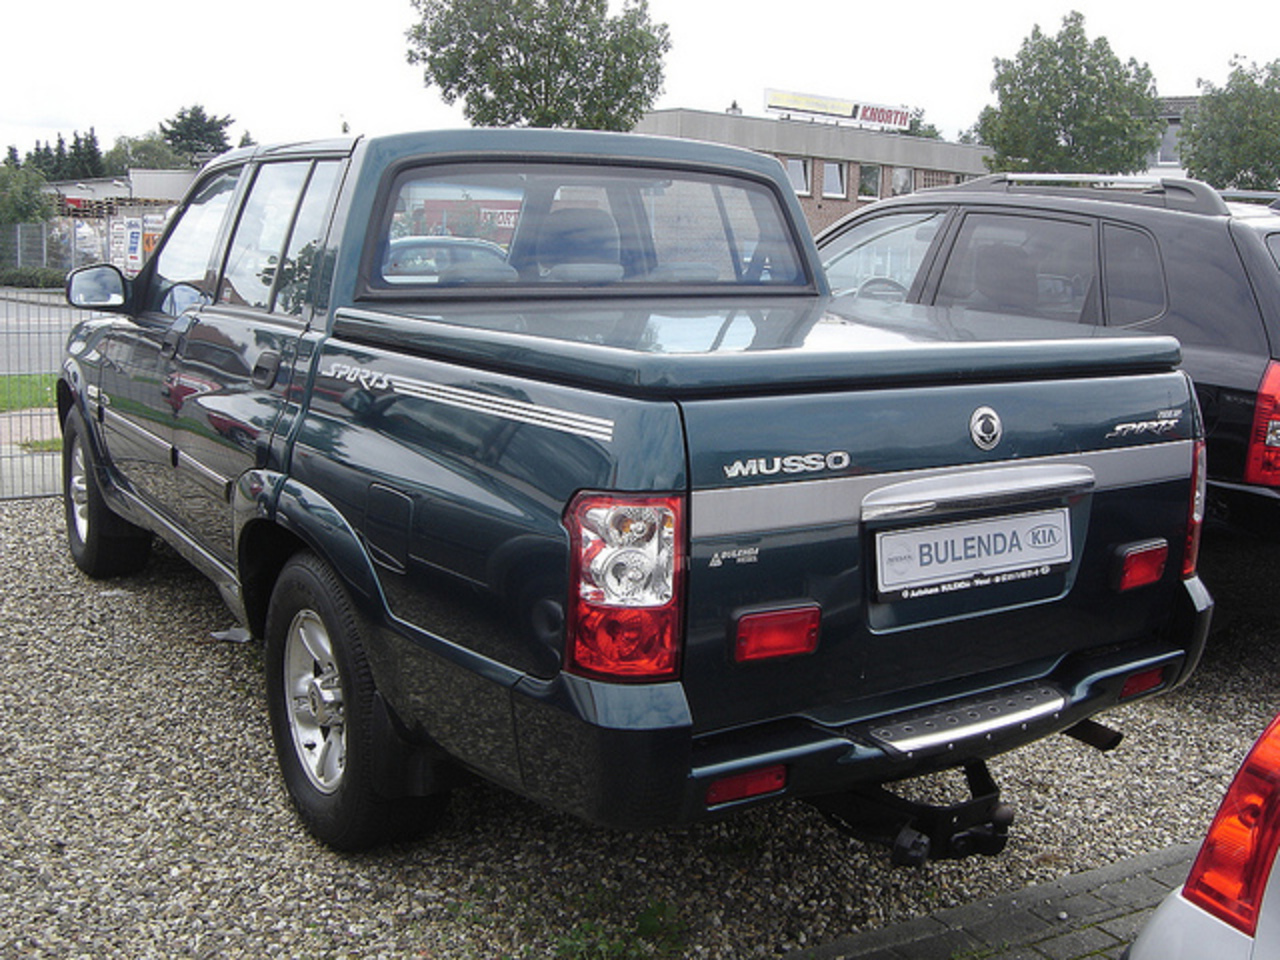 Ssangyong musso sports. Санг енг Муссо пикап. SSANGYONG пикап 2005. SSANGYONG Musso Pickup. SSANGYONG Musso Sports, 2005.